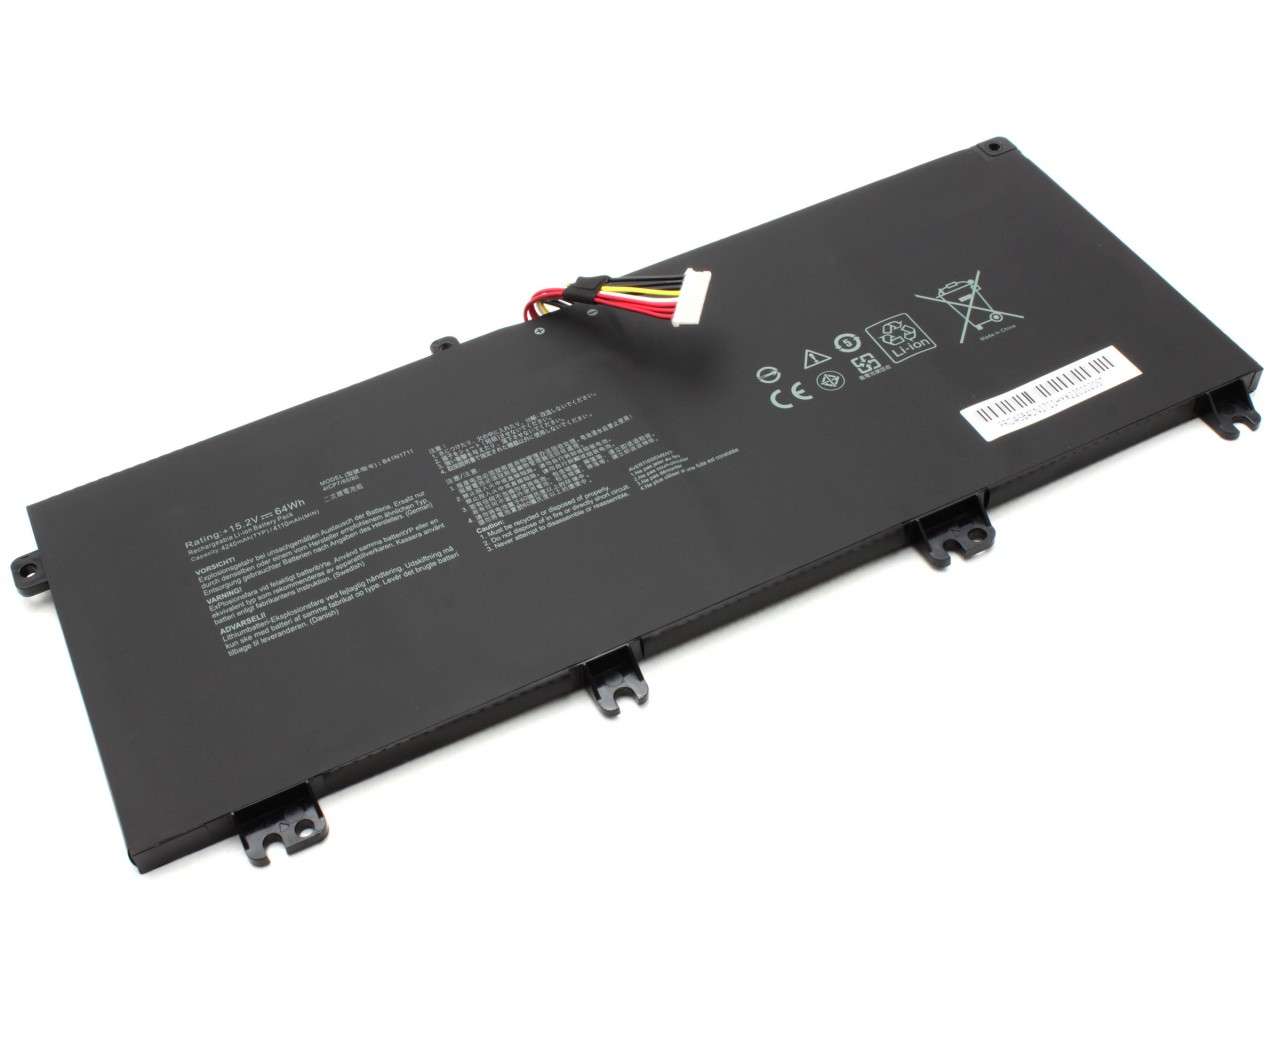 Baterie Asus FX503VM Protech High Quality Replacement with Long Connector ASUS imagine noua reconect.ro